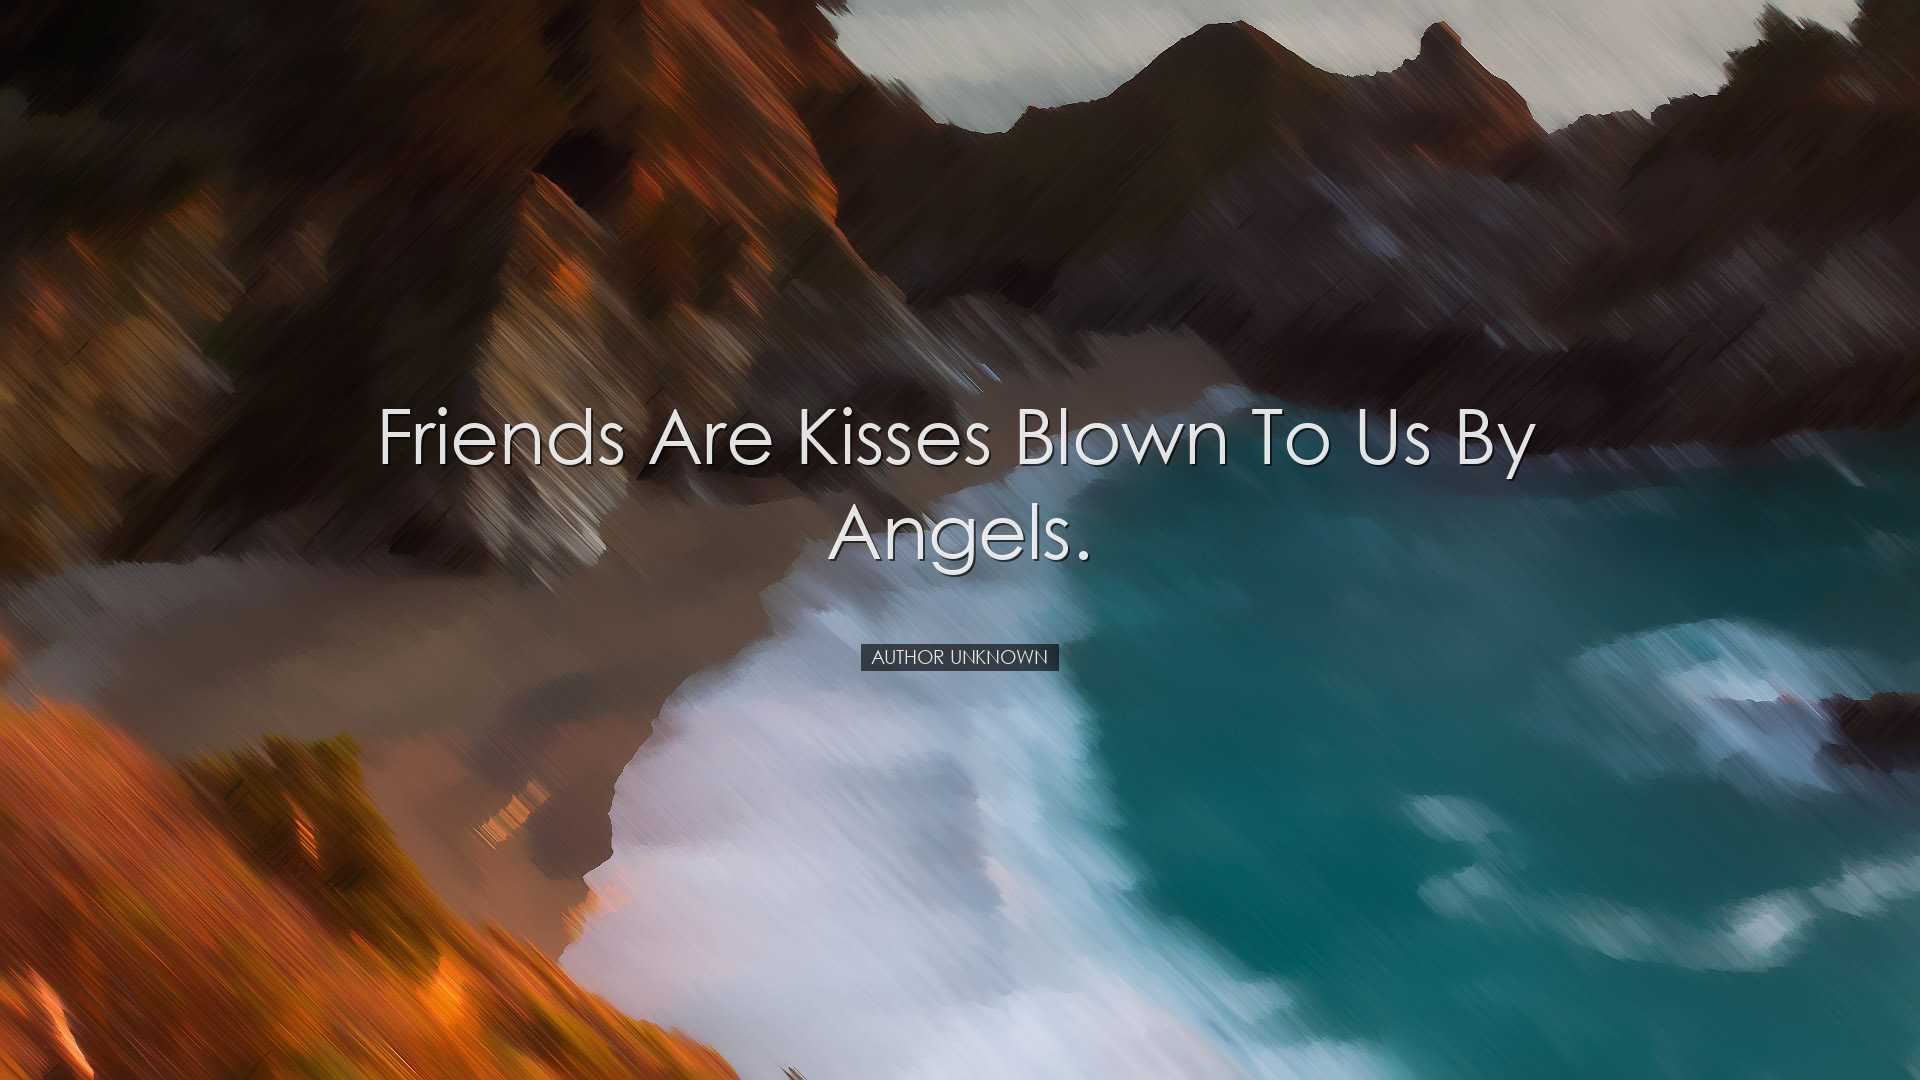 Friends are kisses blown to us by angels. - Author Unknown